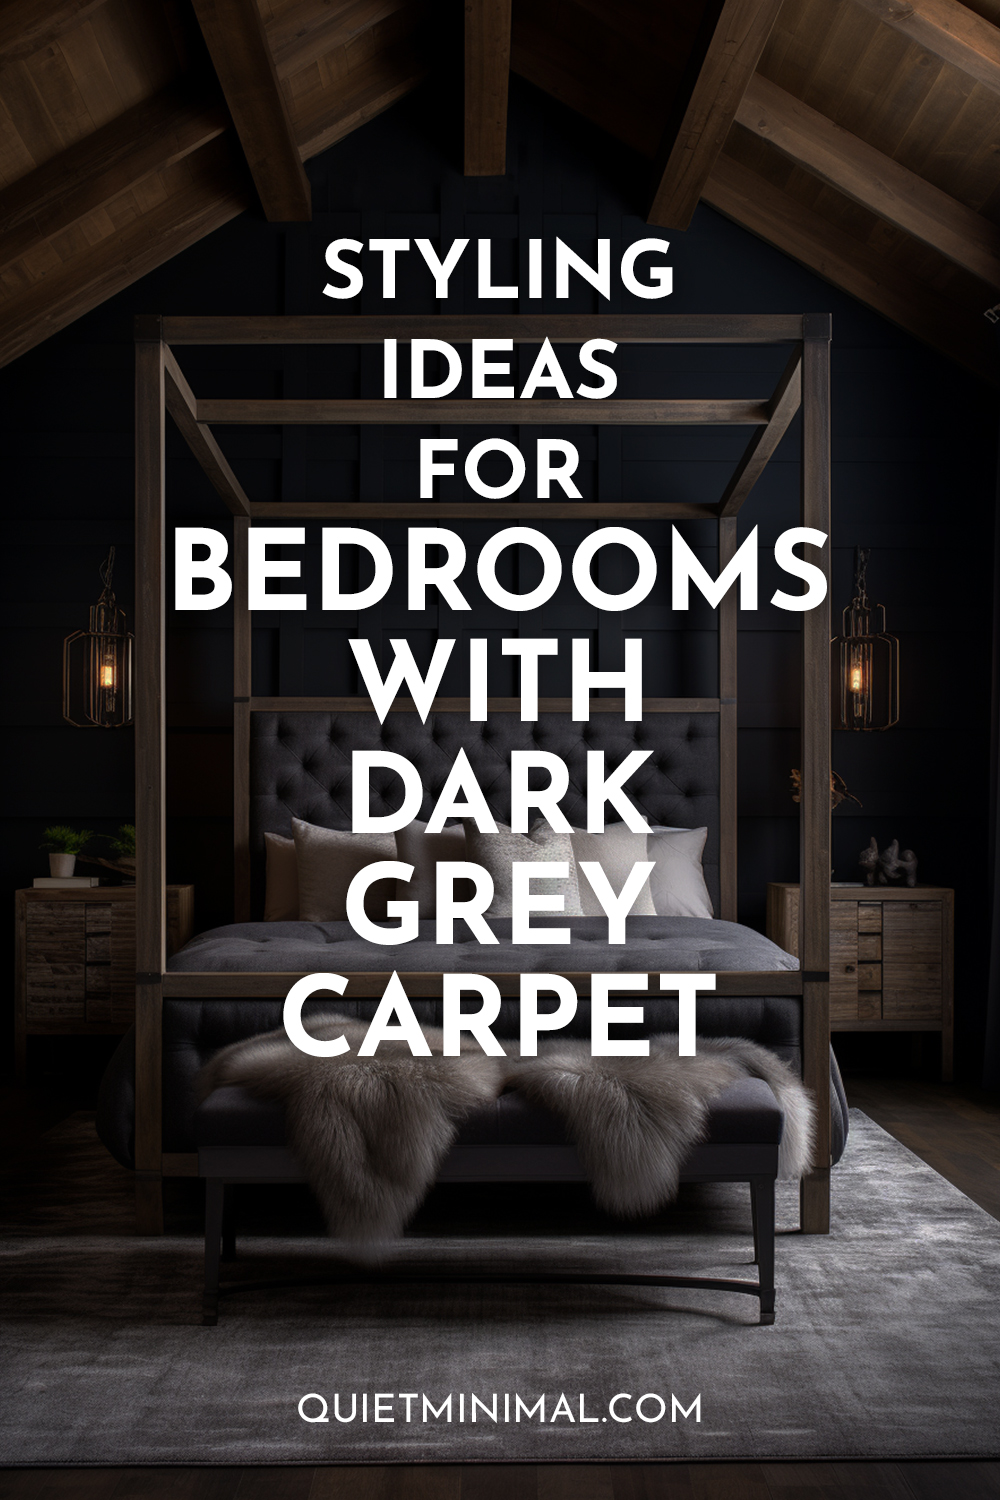 Discover stylish ideas for transforming your bedroom into an elegant retreat adorned with dark grey carpet.